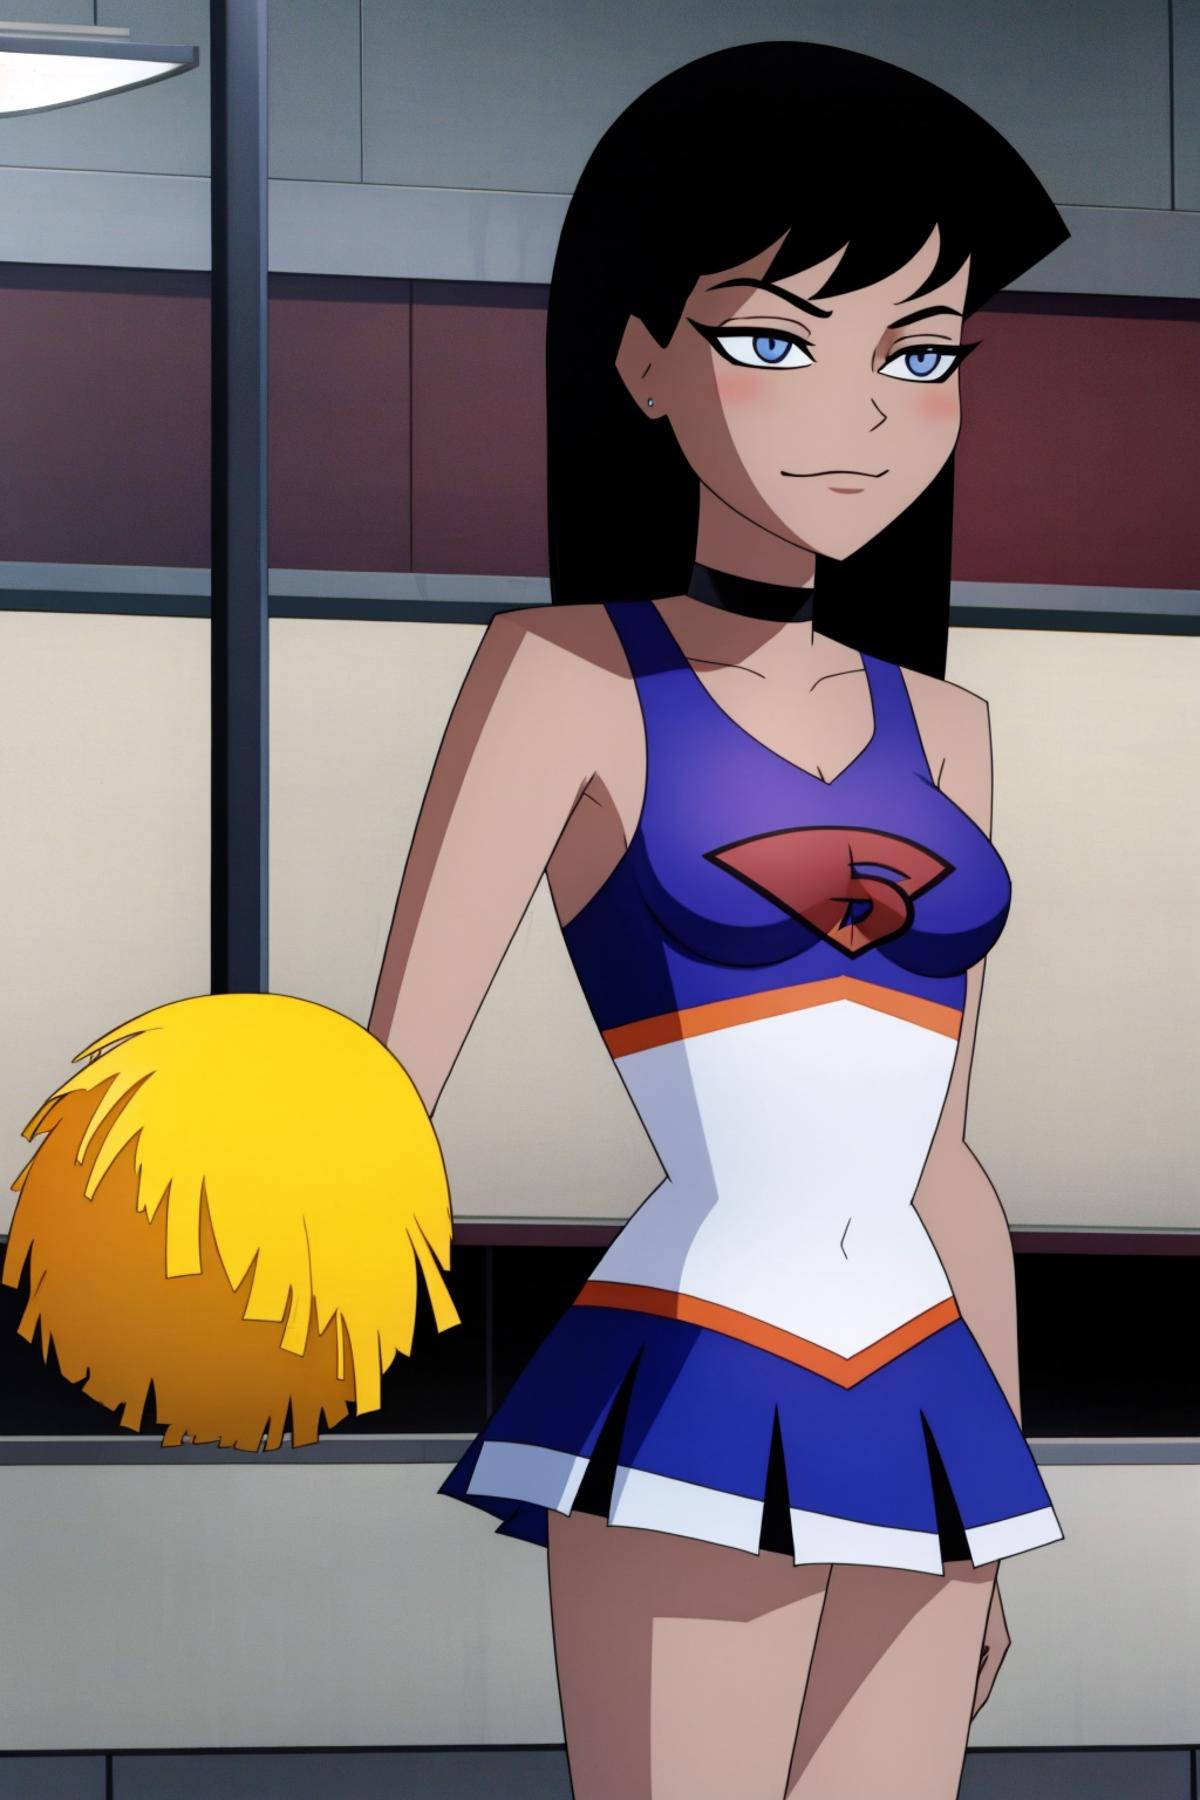 DCAU Girls Style - DC Animated Universe Girls image by reevee